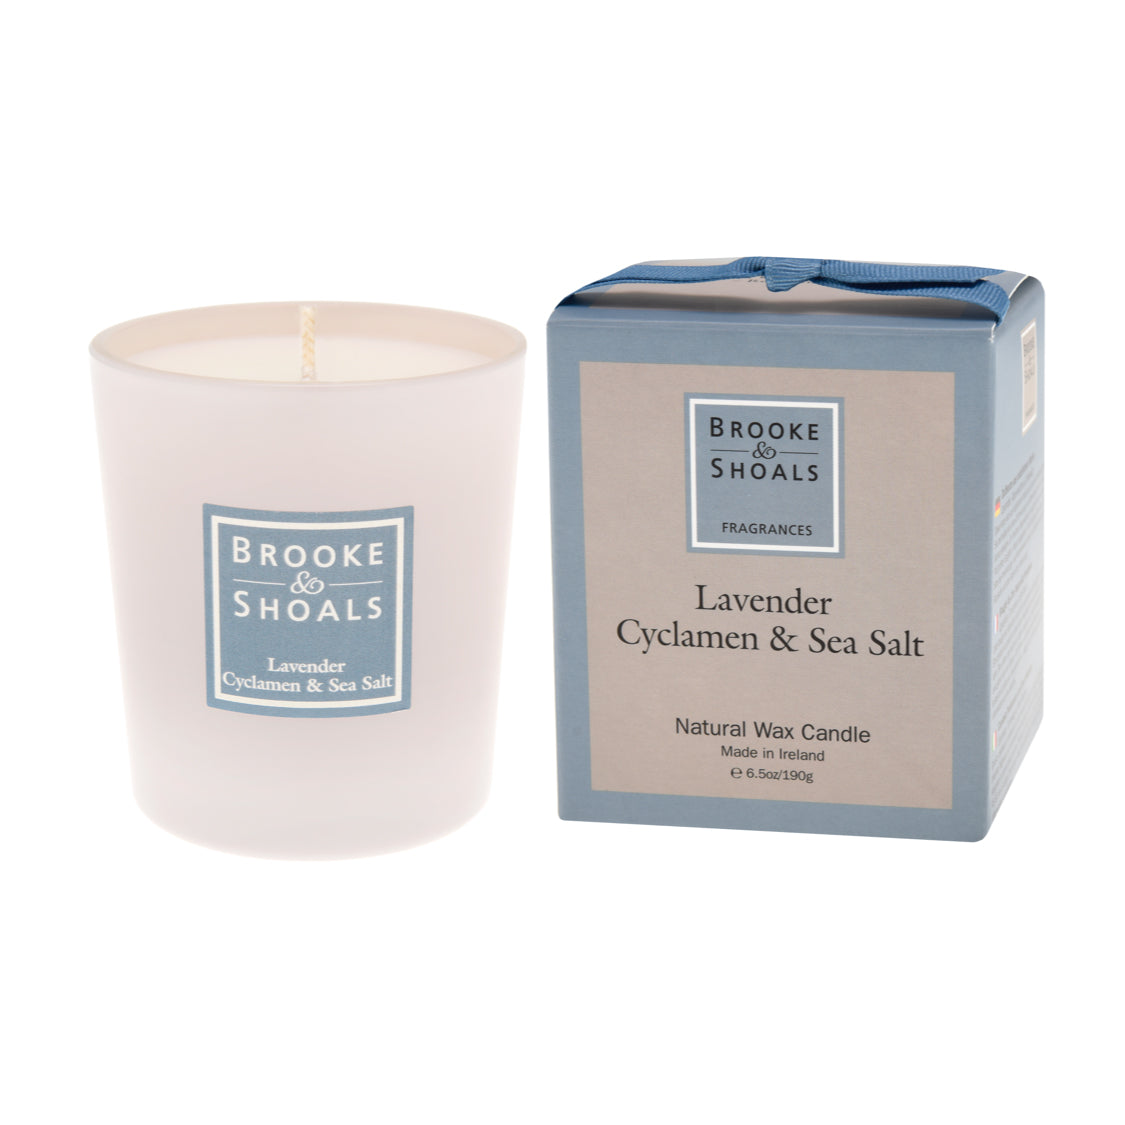 Brooke and Shoals Lavender Cyclamen and Sea Salt Candle